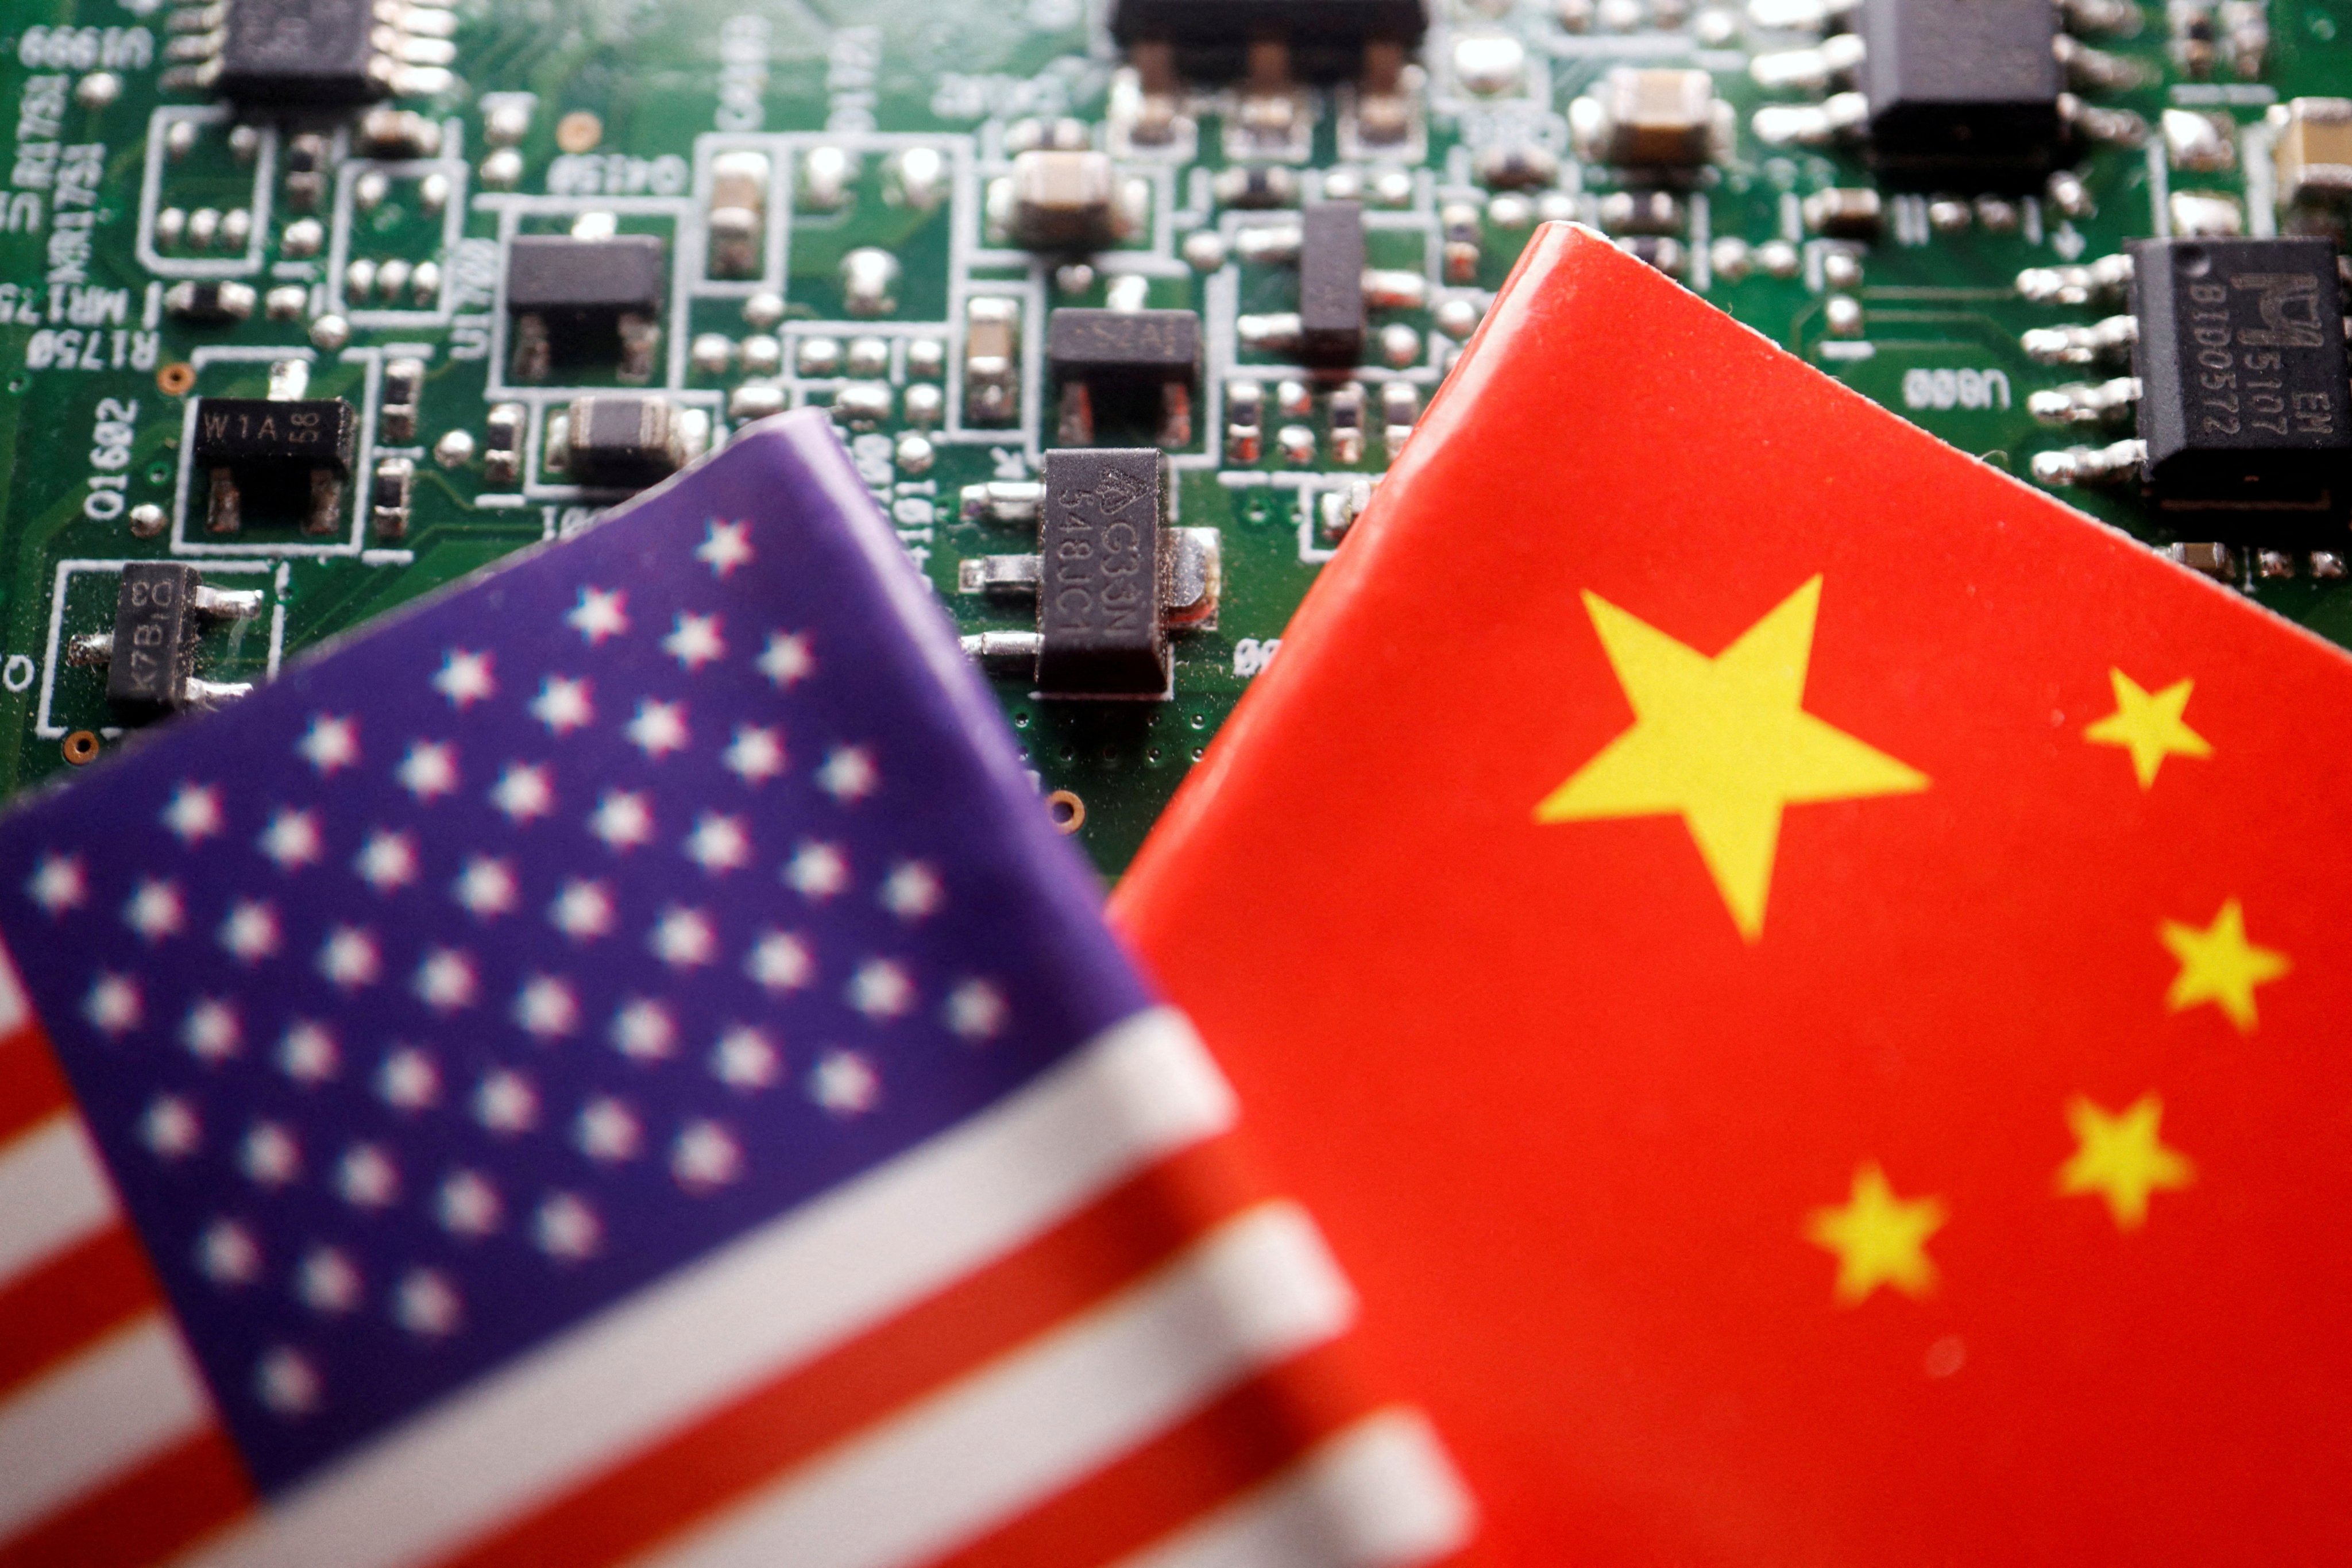 Linkzol (Beijing) Technology Co, Xi’an Like Innovative Information Technology Co, Beijing Anwise Technology Co and Sitonholy (Tianjin) Co were among 11 companies added to the US Commerce Department Entity List. Photo illustration: Reauters